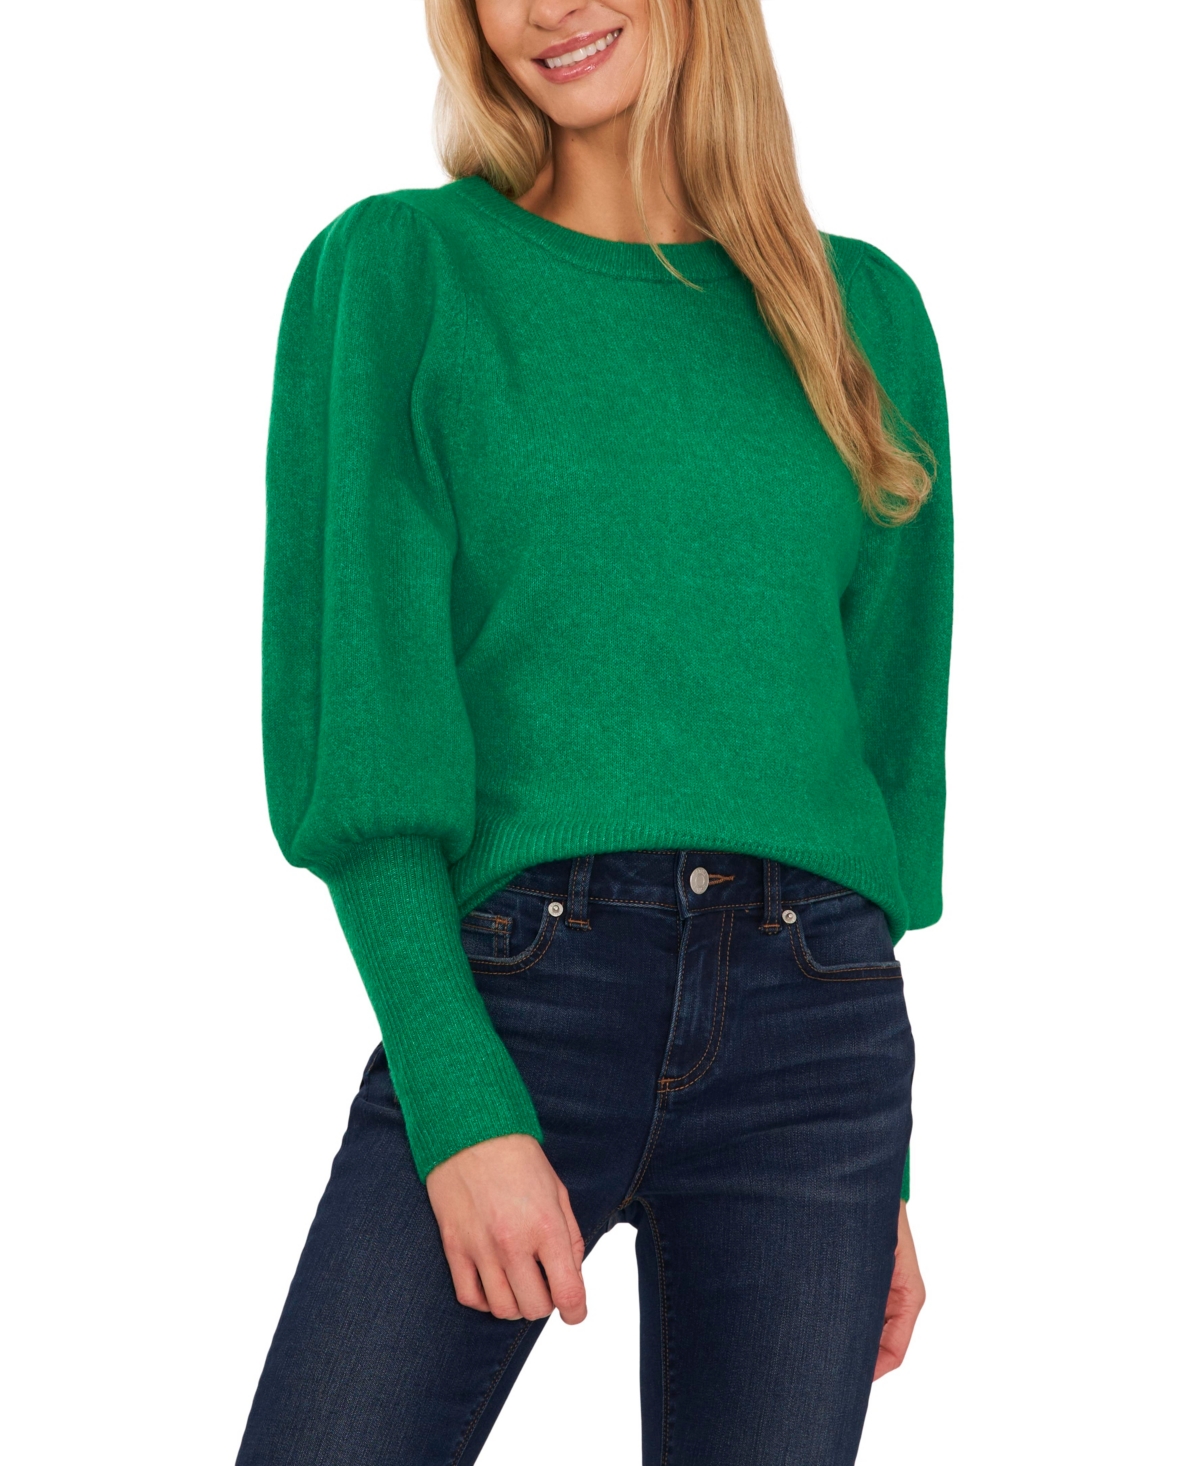 Vintage Sweaters, Retro Sweaters & Cardigan CeCe Womens Puff Long Sleeve Crew Neck Sweater - Electric Green $34.50 AT vintagedancer.com